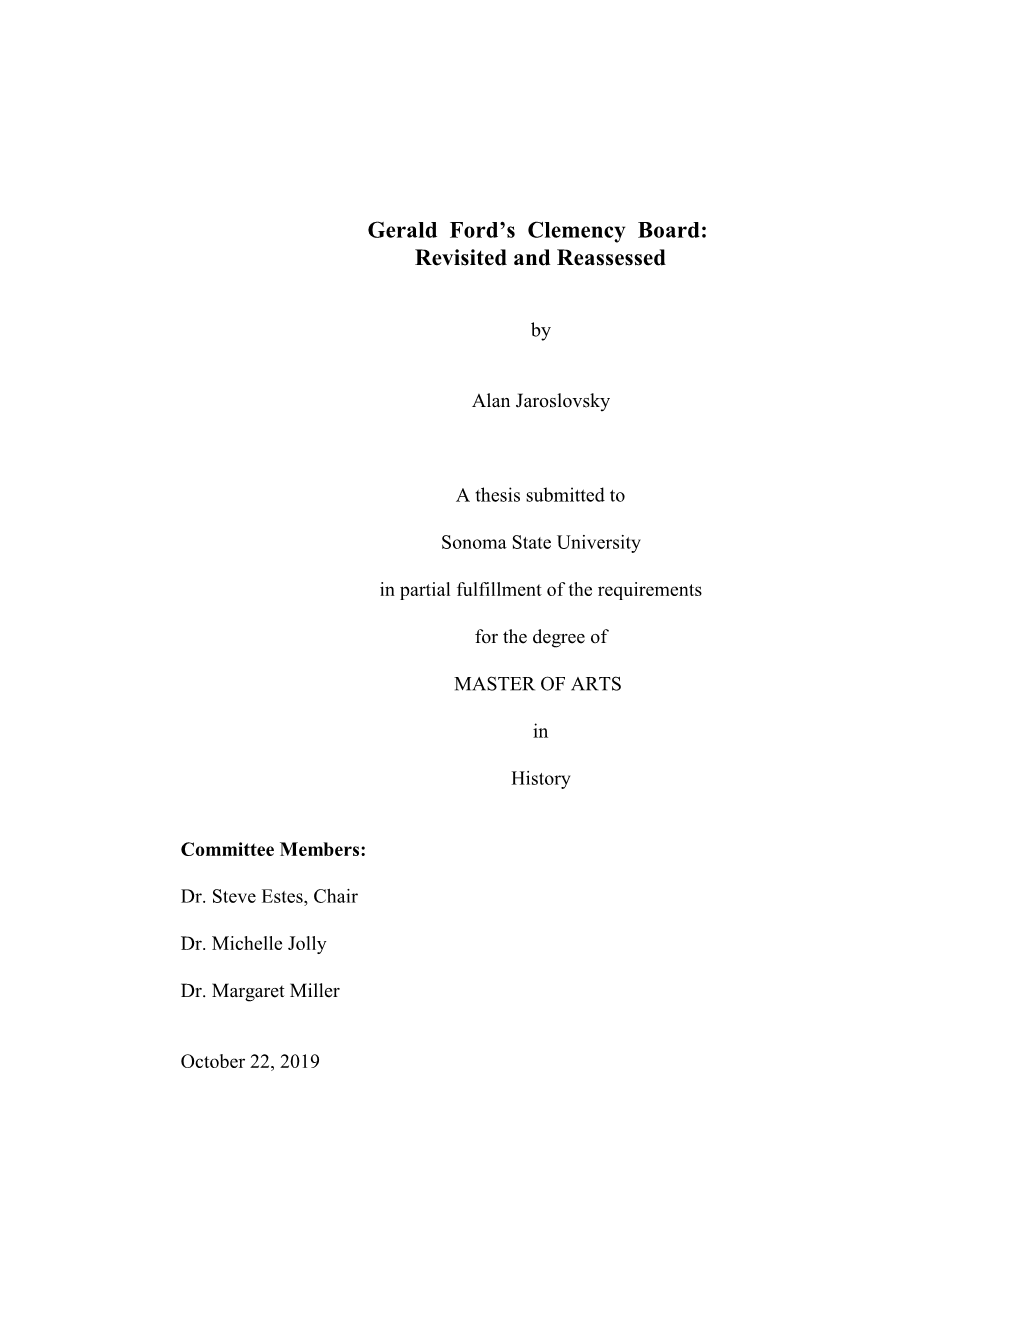 Gerald Ford's Clemency Board: Revisited And